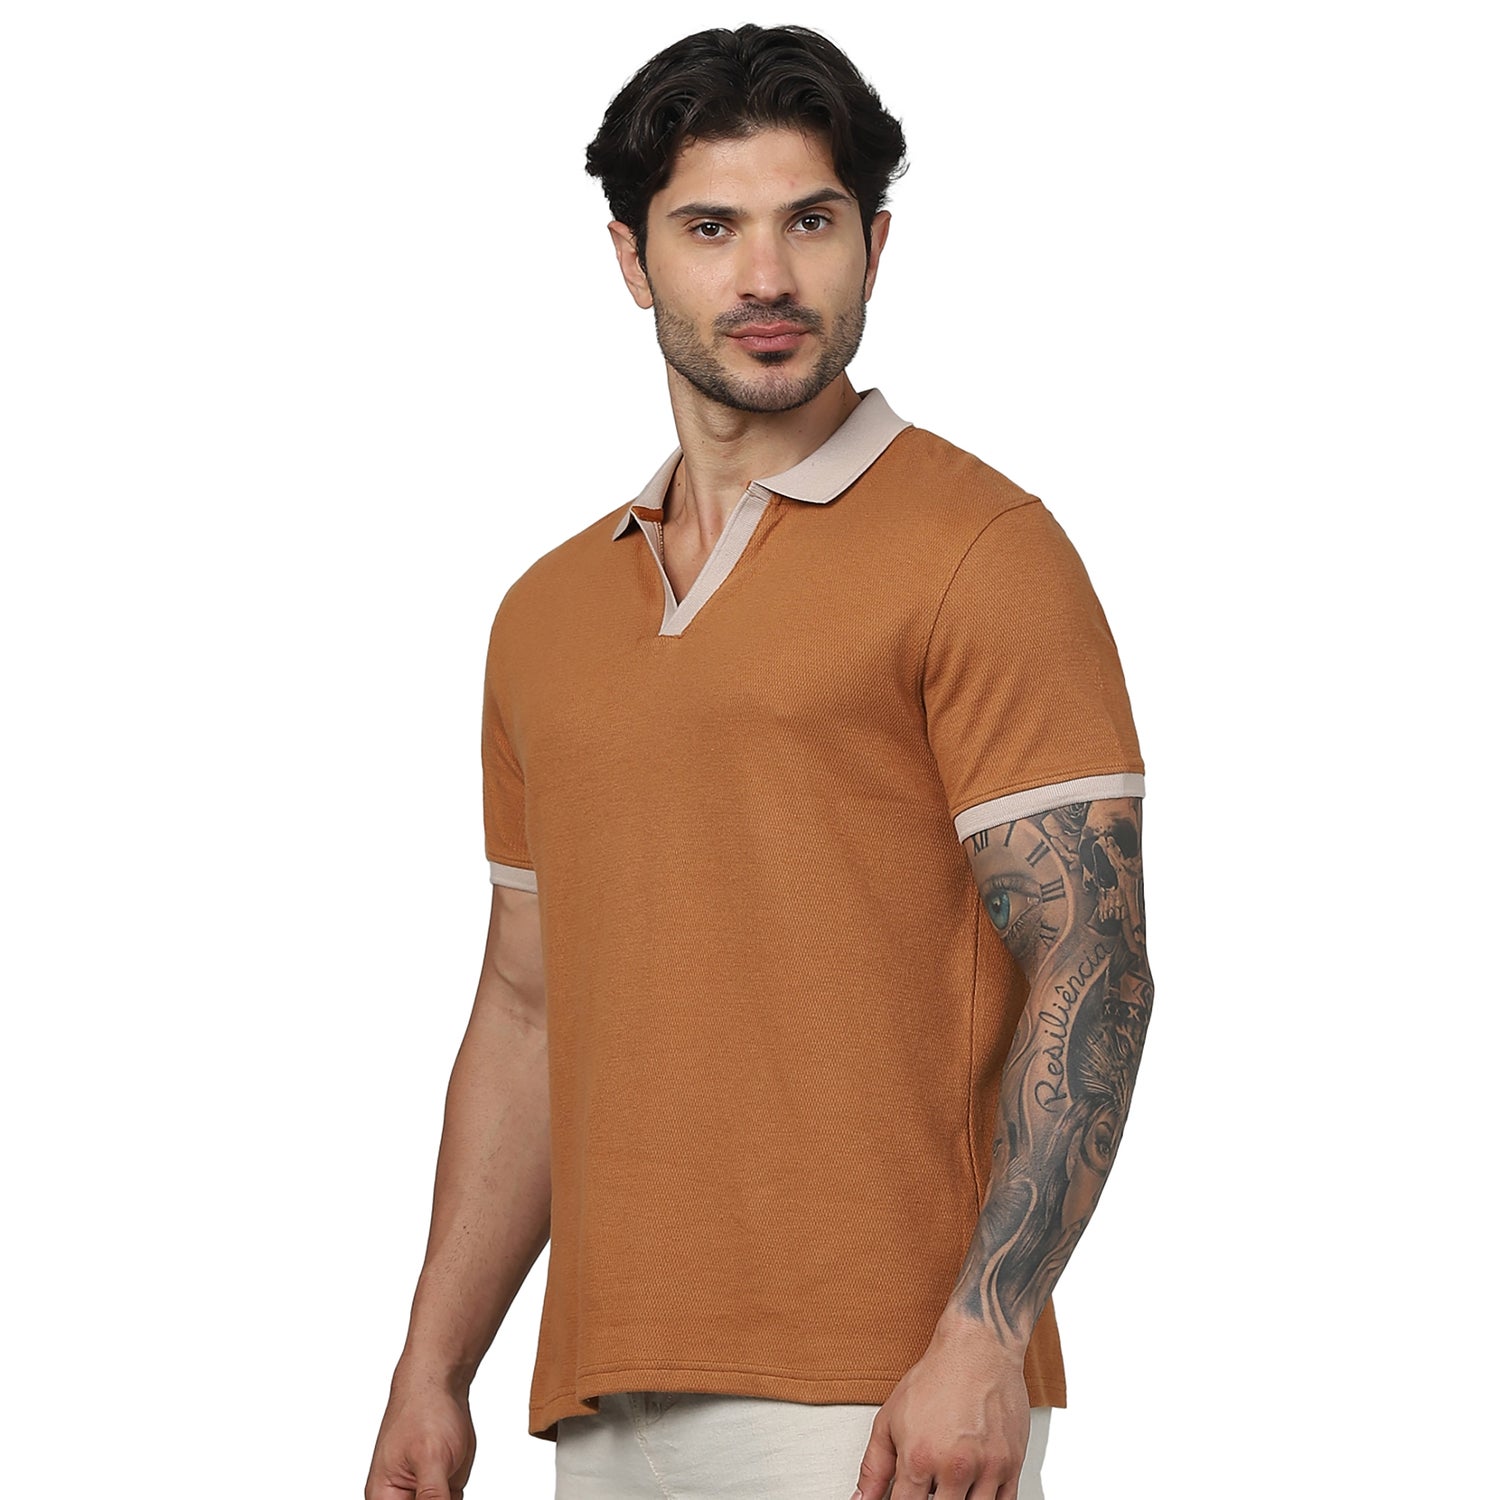 Men's Brown Polo Collar Solid Regular Fit Cotton Fashion Polo Tshirts (GEHENLEY)